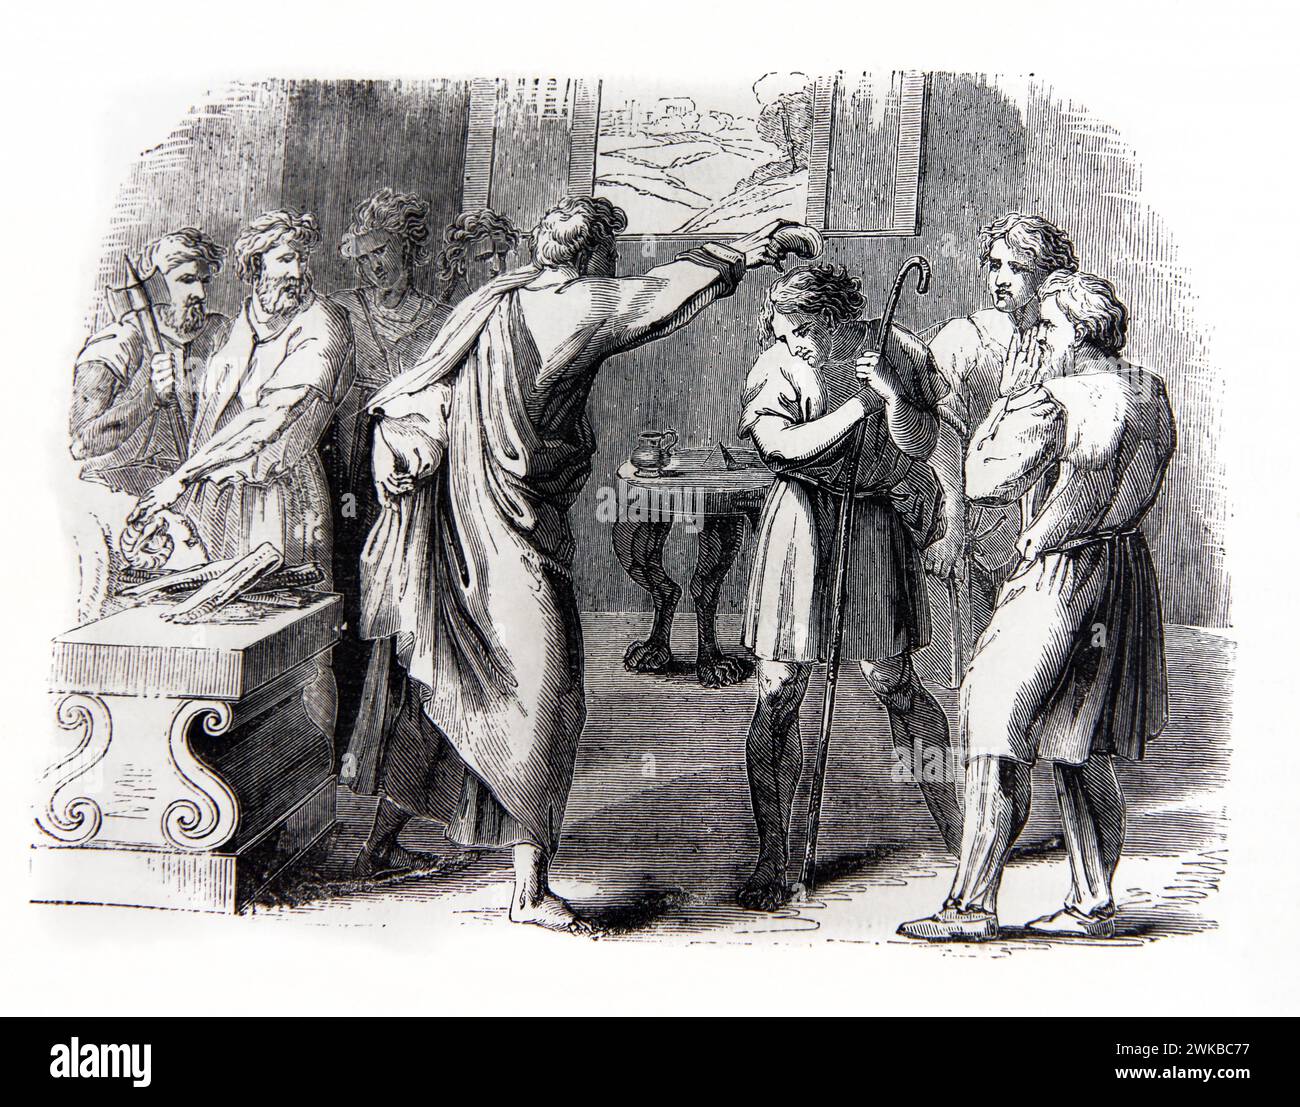 Illustration of Prophet Samuel Anointing David to Be King over Israel (Samuel) from Antique 19th Century Illustrated Family Bible Stock Photo